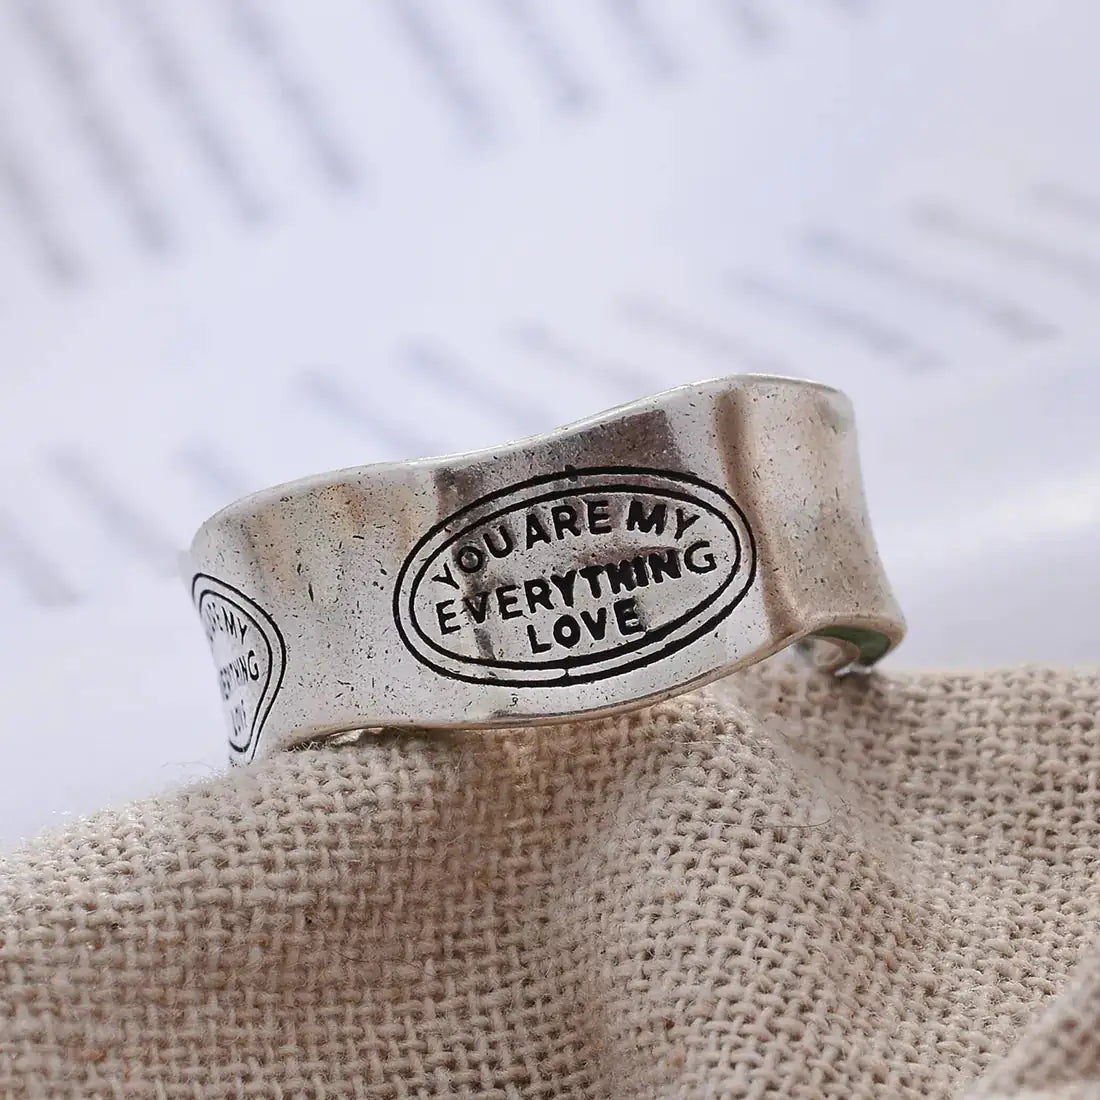 "You are my everything love" Ring